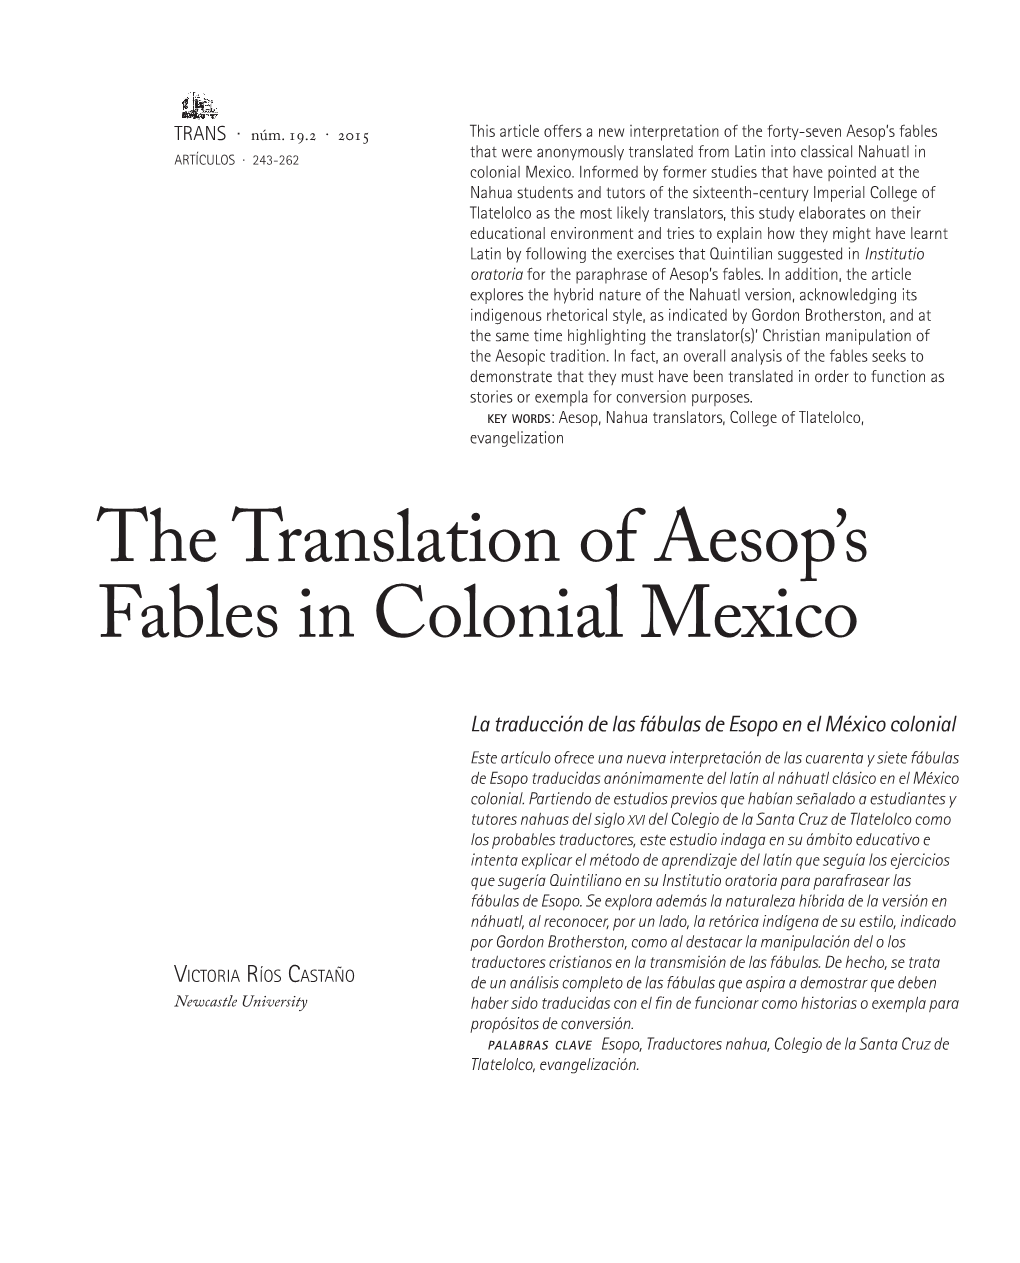 The Translation of Aesop's Fables In